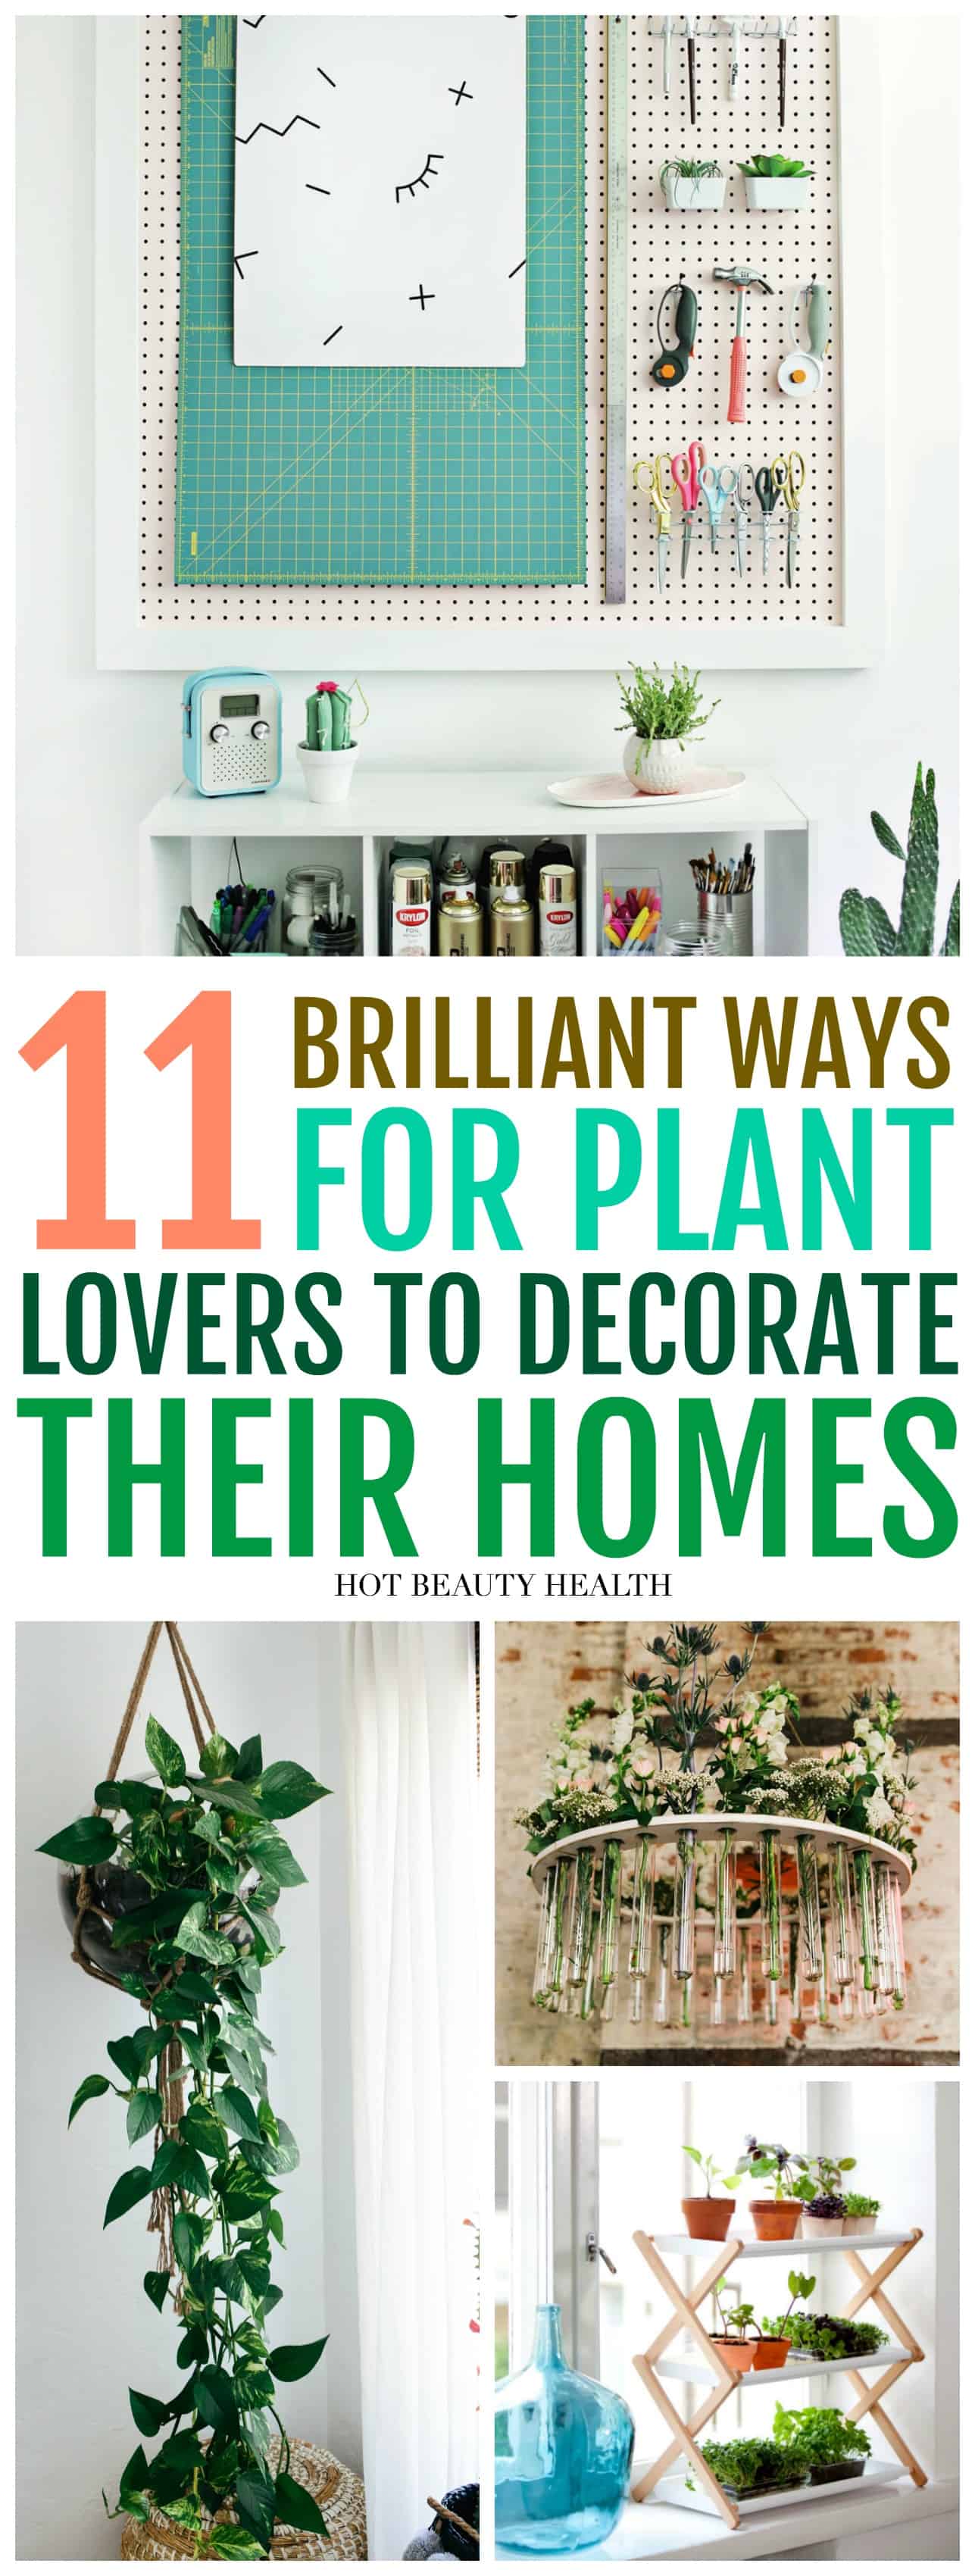 decorate your home with plants